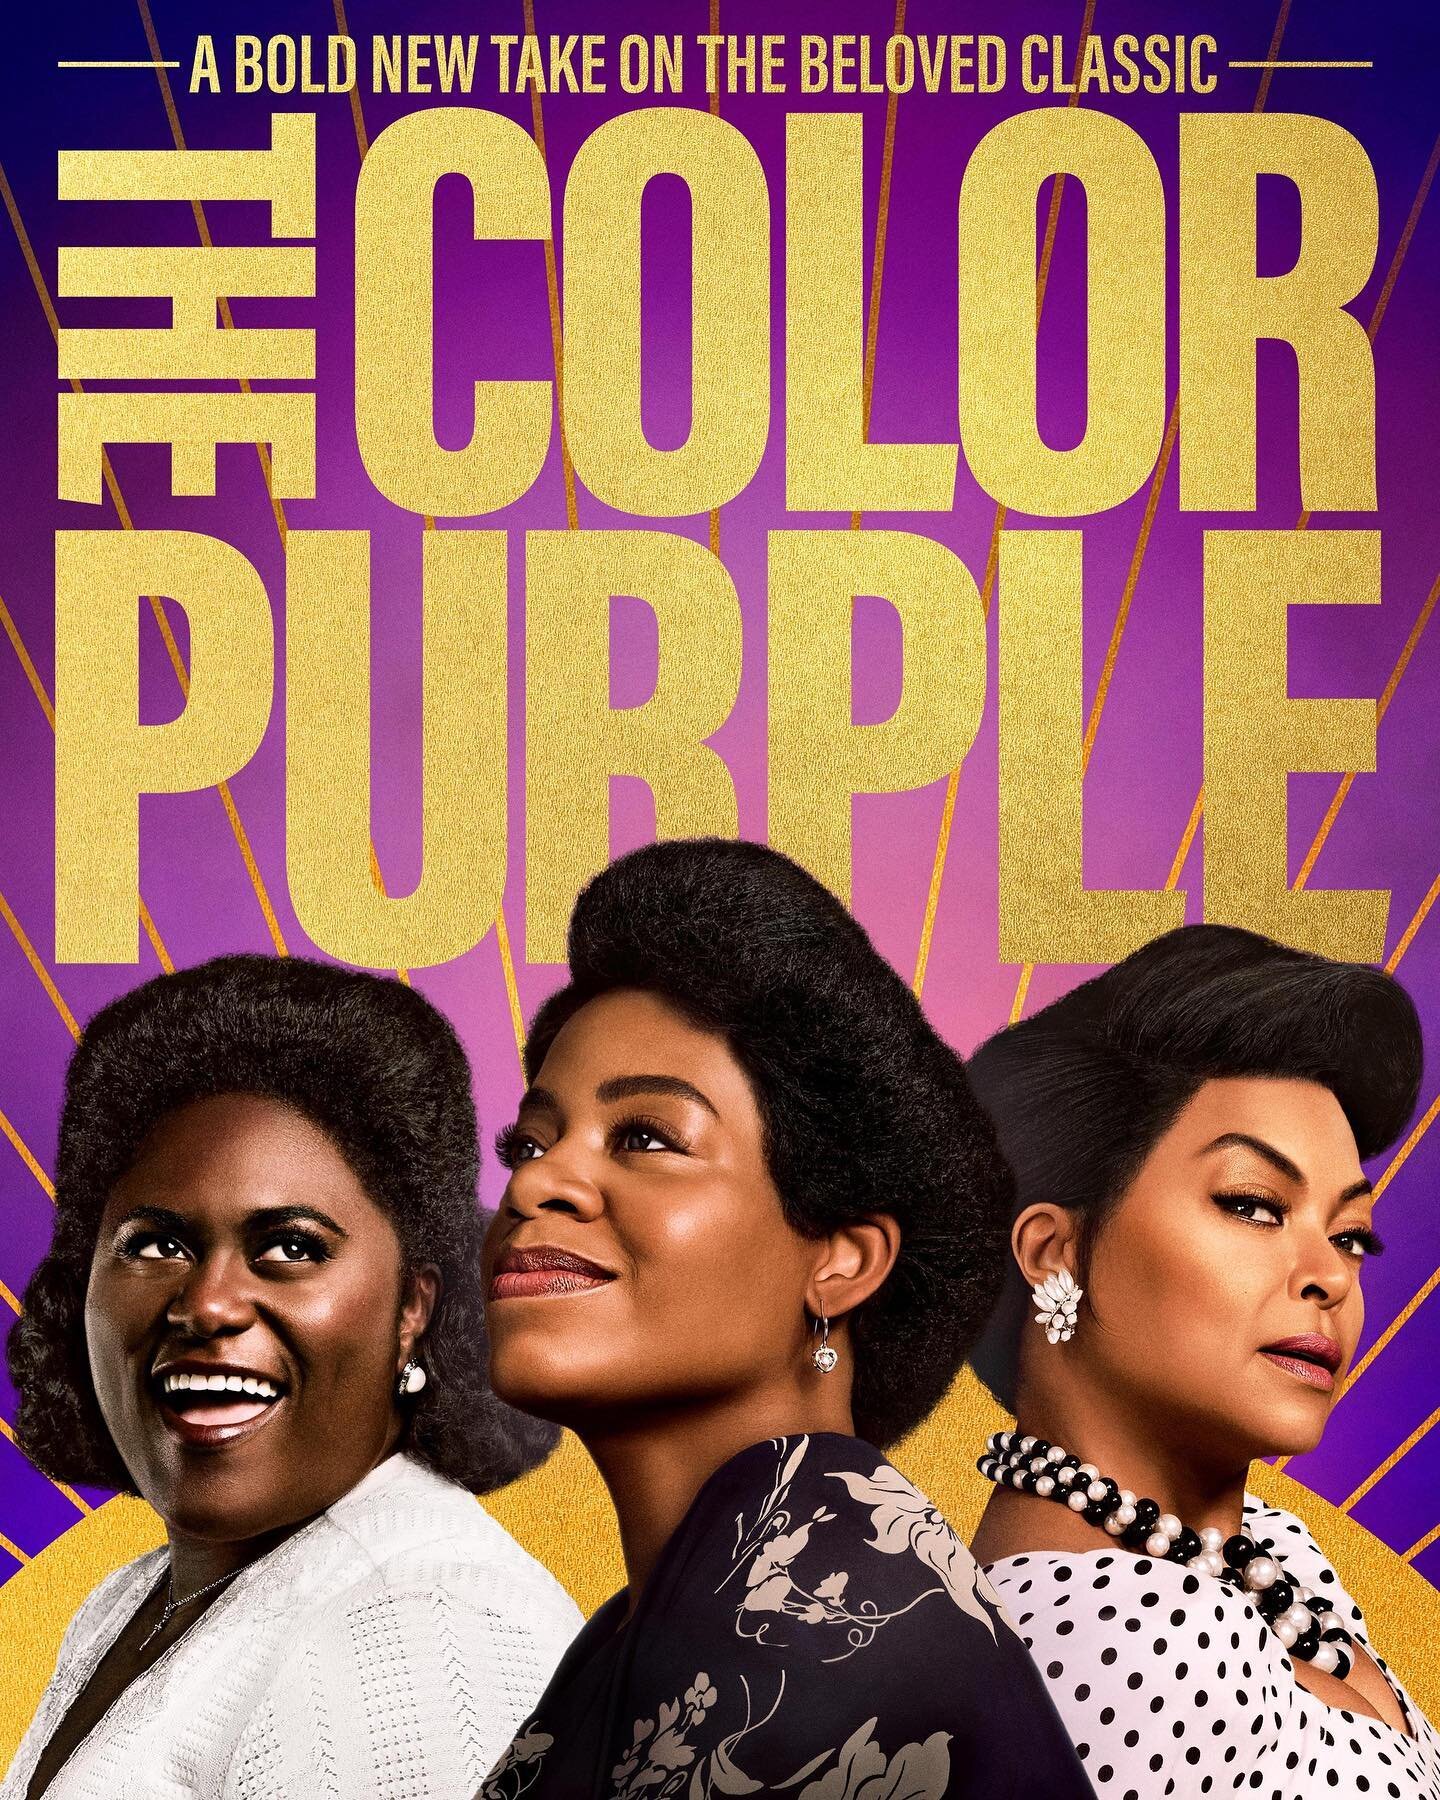 The Color Purple is out! @nicholaibaxter served as an Executive Music Producer and @pjmcfry mixed the soundtrack in Atmos. Additional Igloo crew involved on this film include @theawithouttheh, vocal engineer @jmoshk and Song Programmer and Recordist 